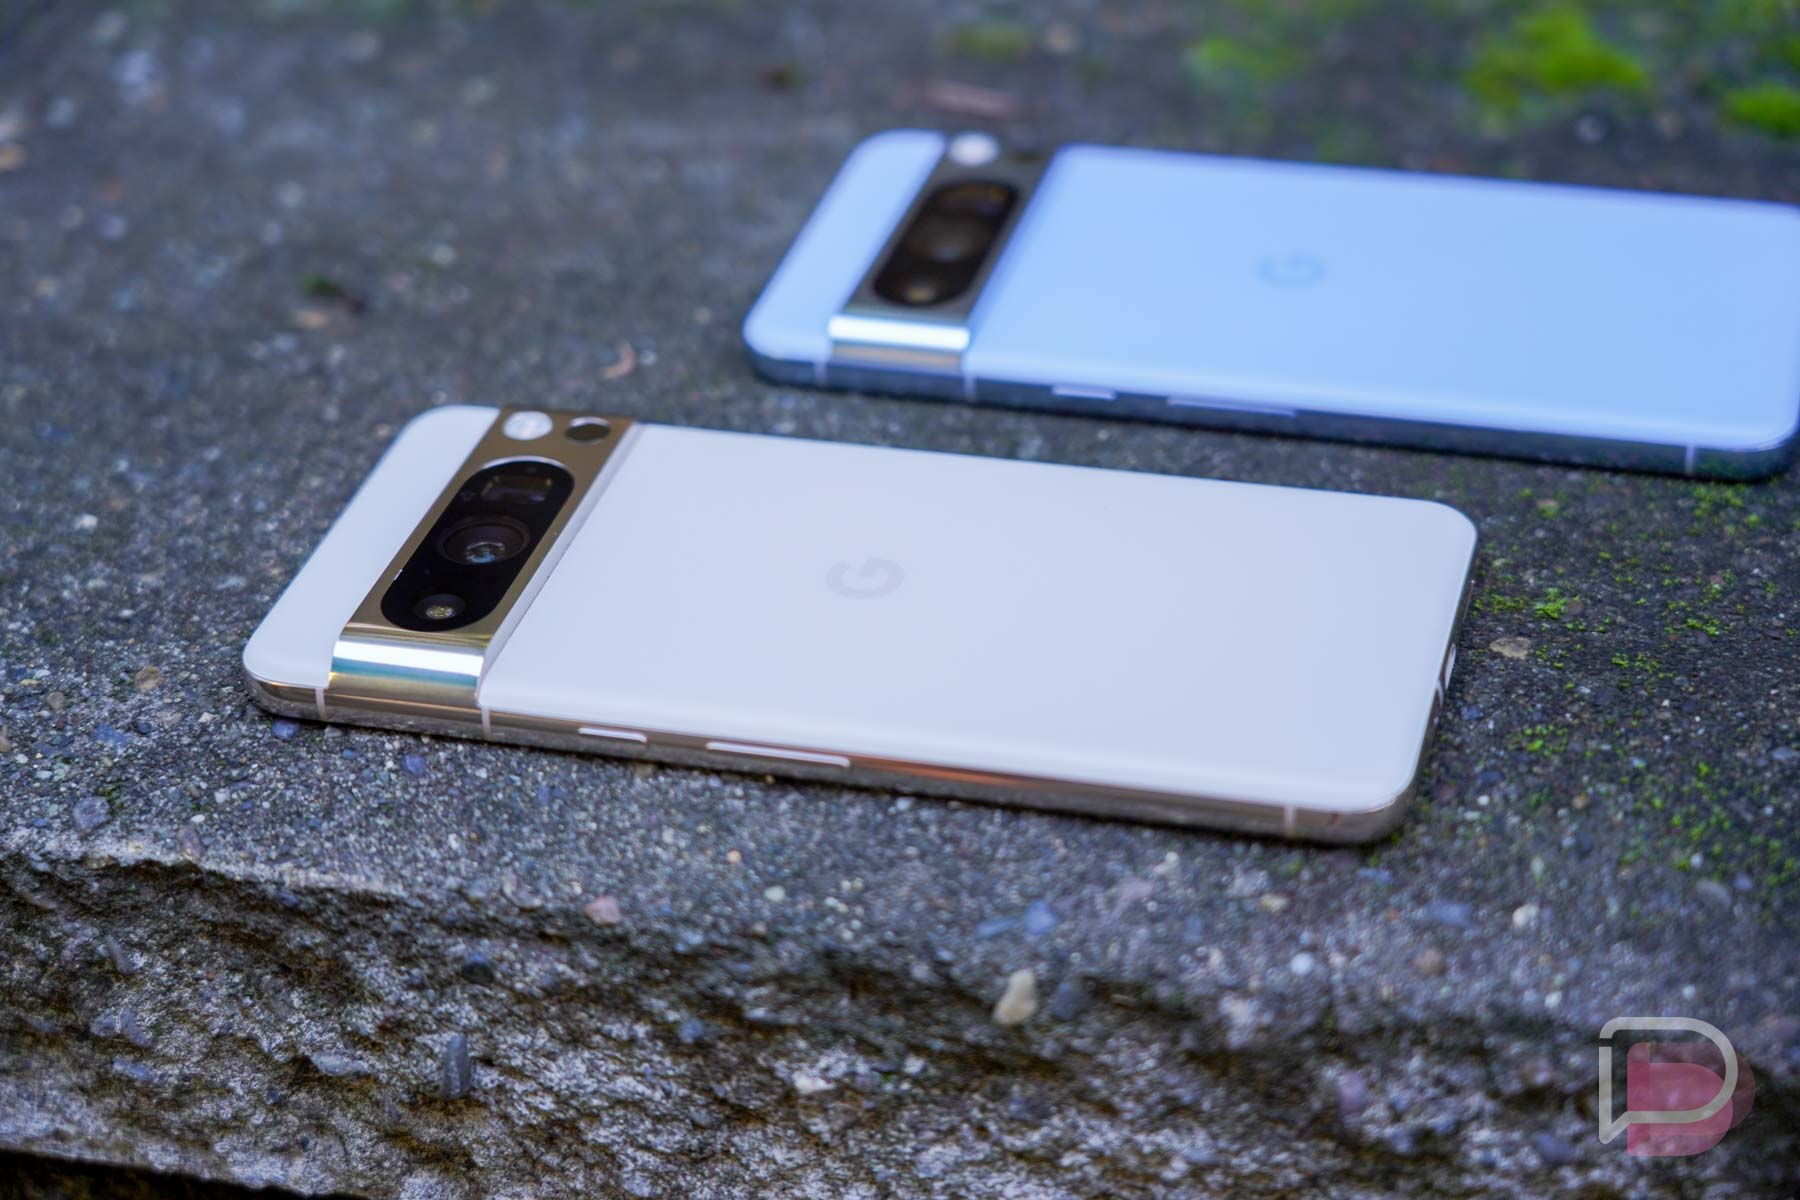 Google's $999 Pixel 8 Pro leans into high-end camera features